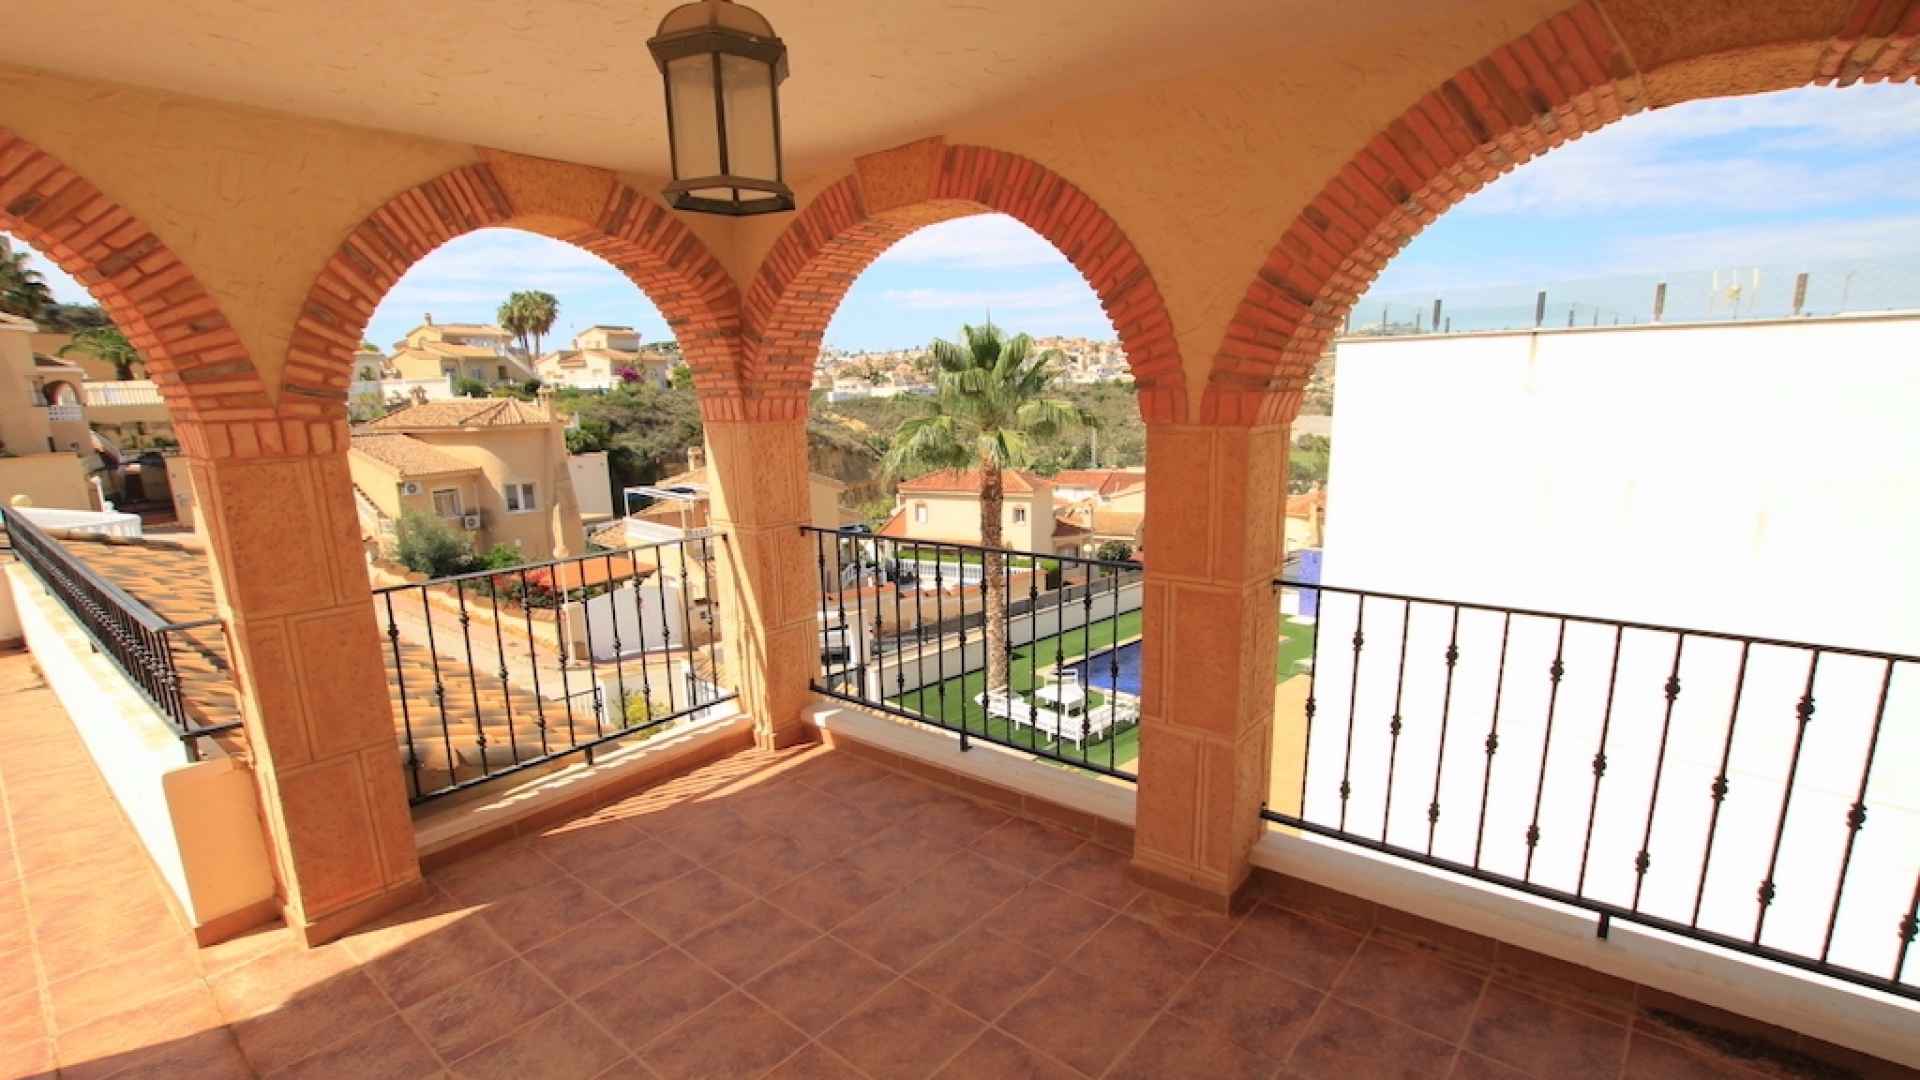 48100_charming_3_bedroom_detached_villa_with_golf_course_views_310523142112_img_3980